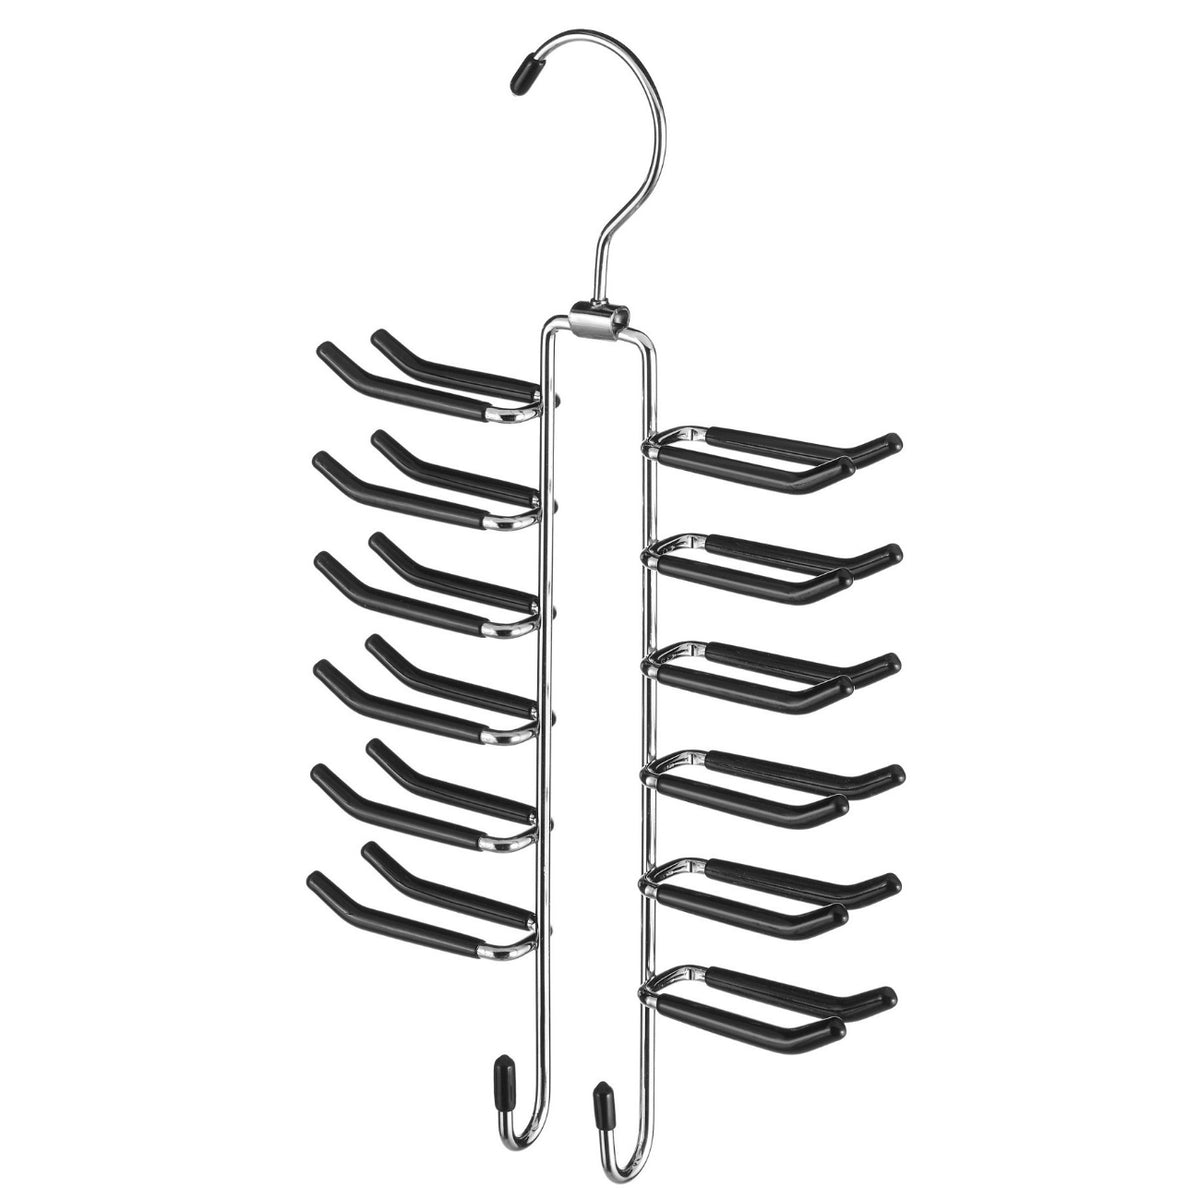 buy storage hooks at cheap rate in bulk. wholesale & retail small & large storage bins store.